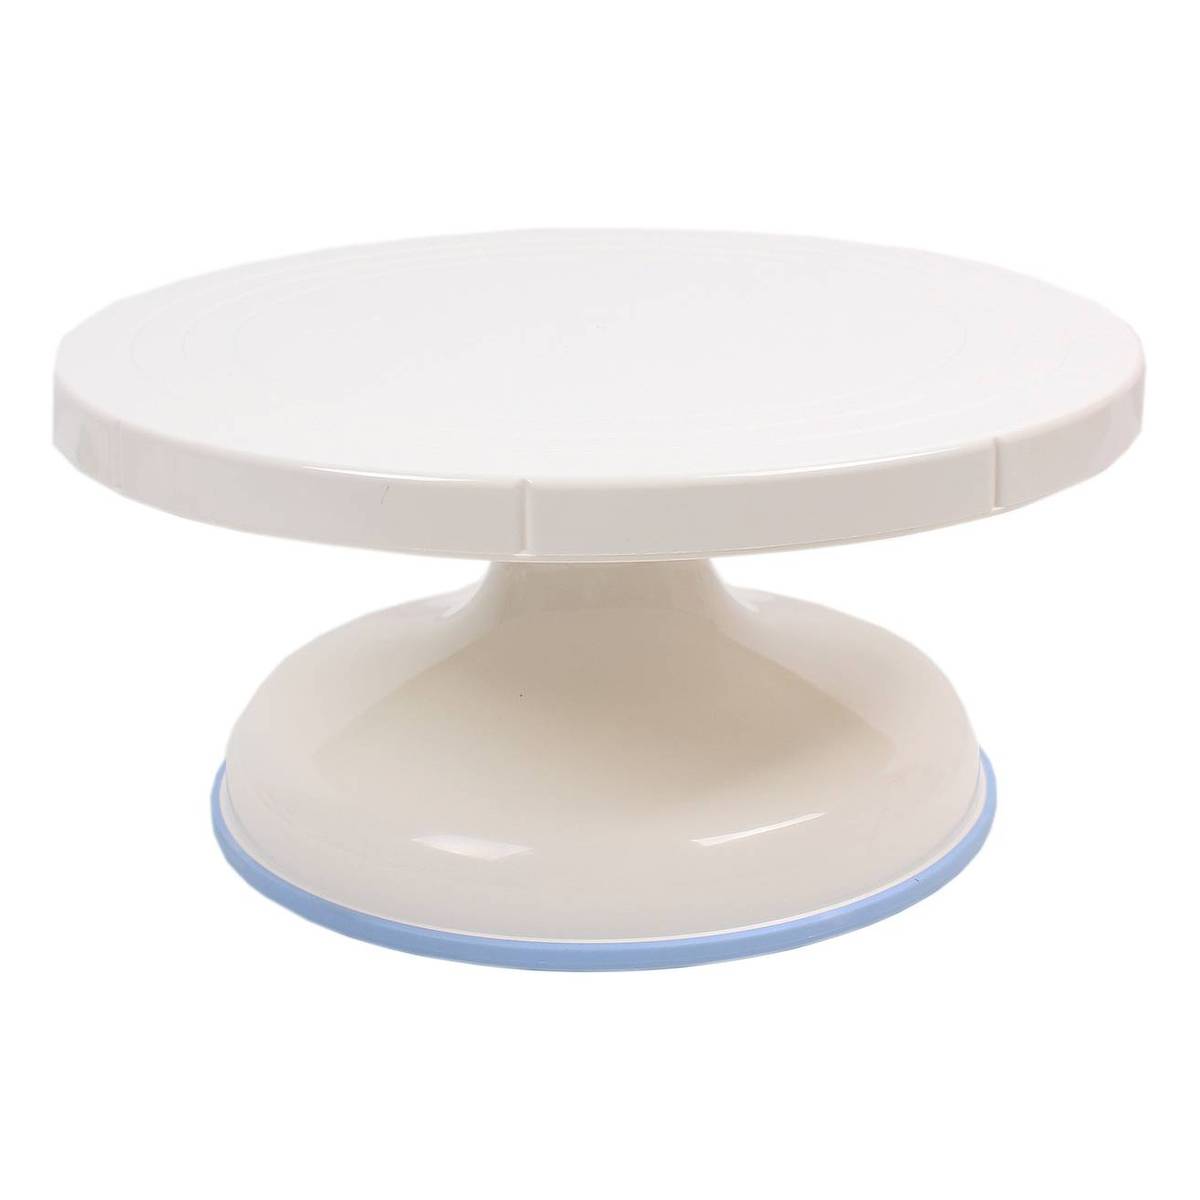 Cake Stand - Shop for High-Quality Nordic Home Living Products in Malaysia  and Singapore